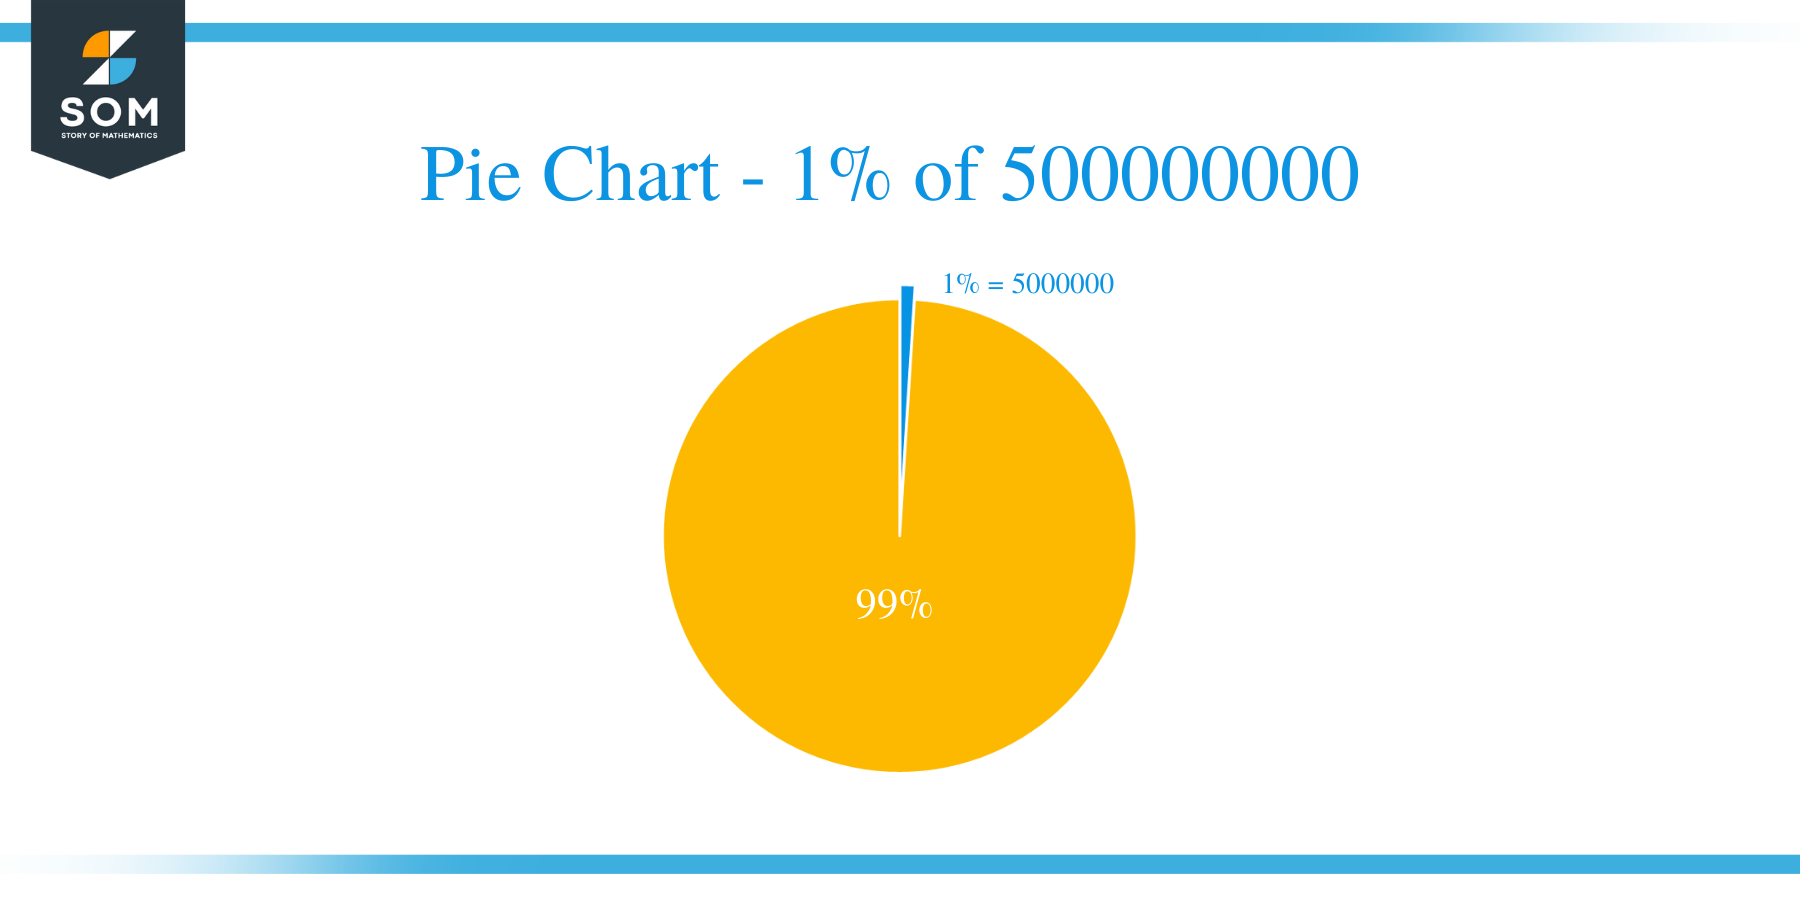 pie chart of 1 percent of 500000000